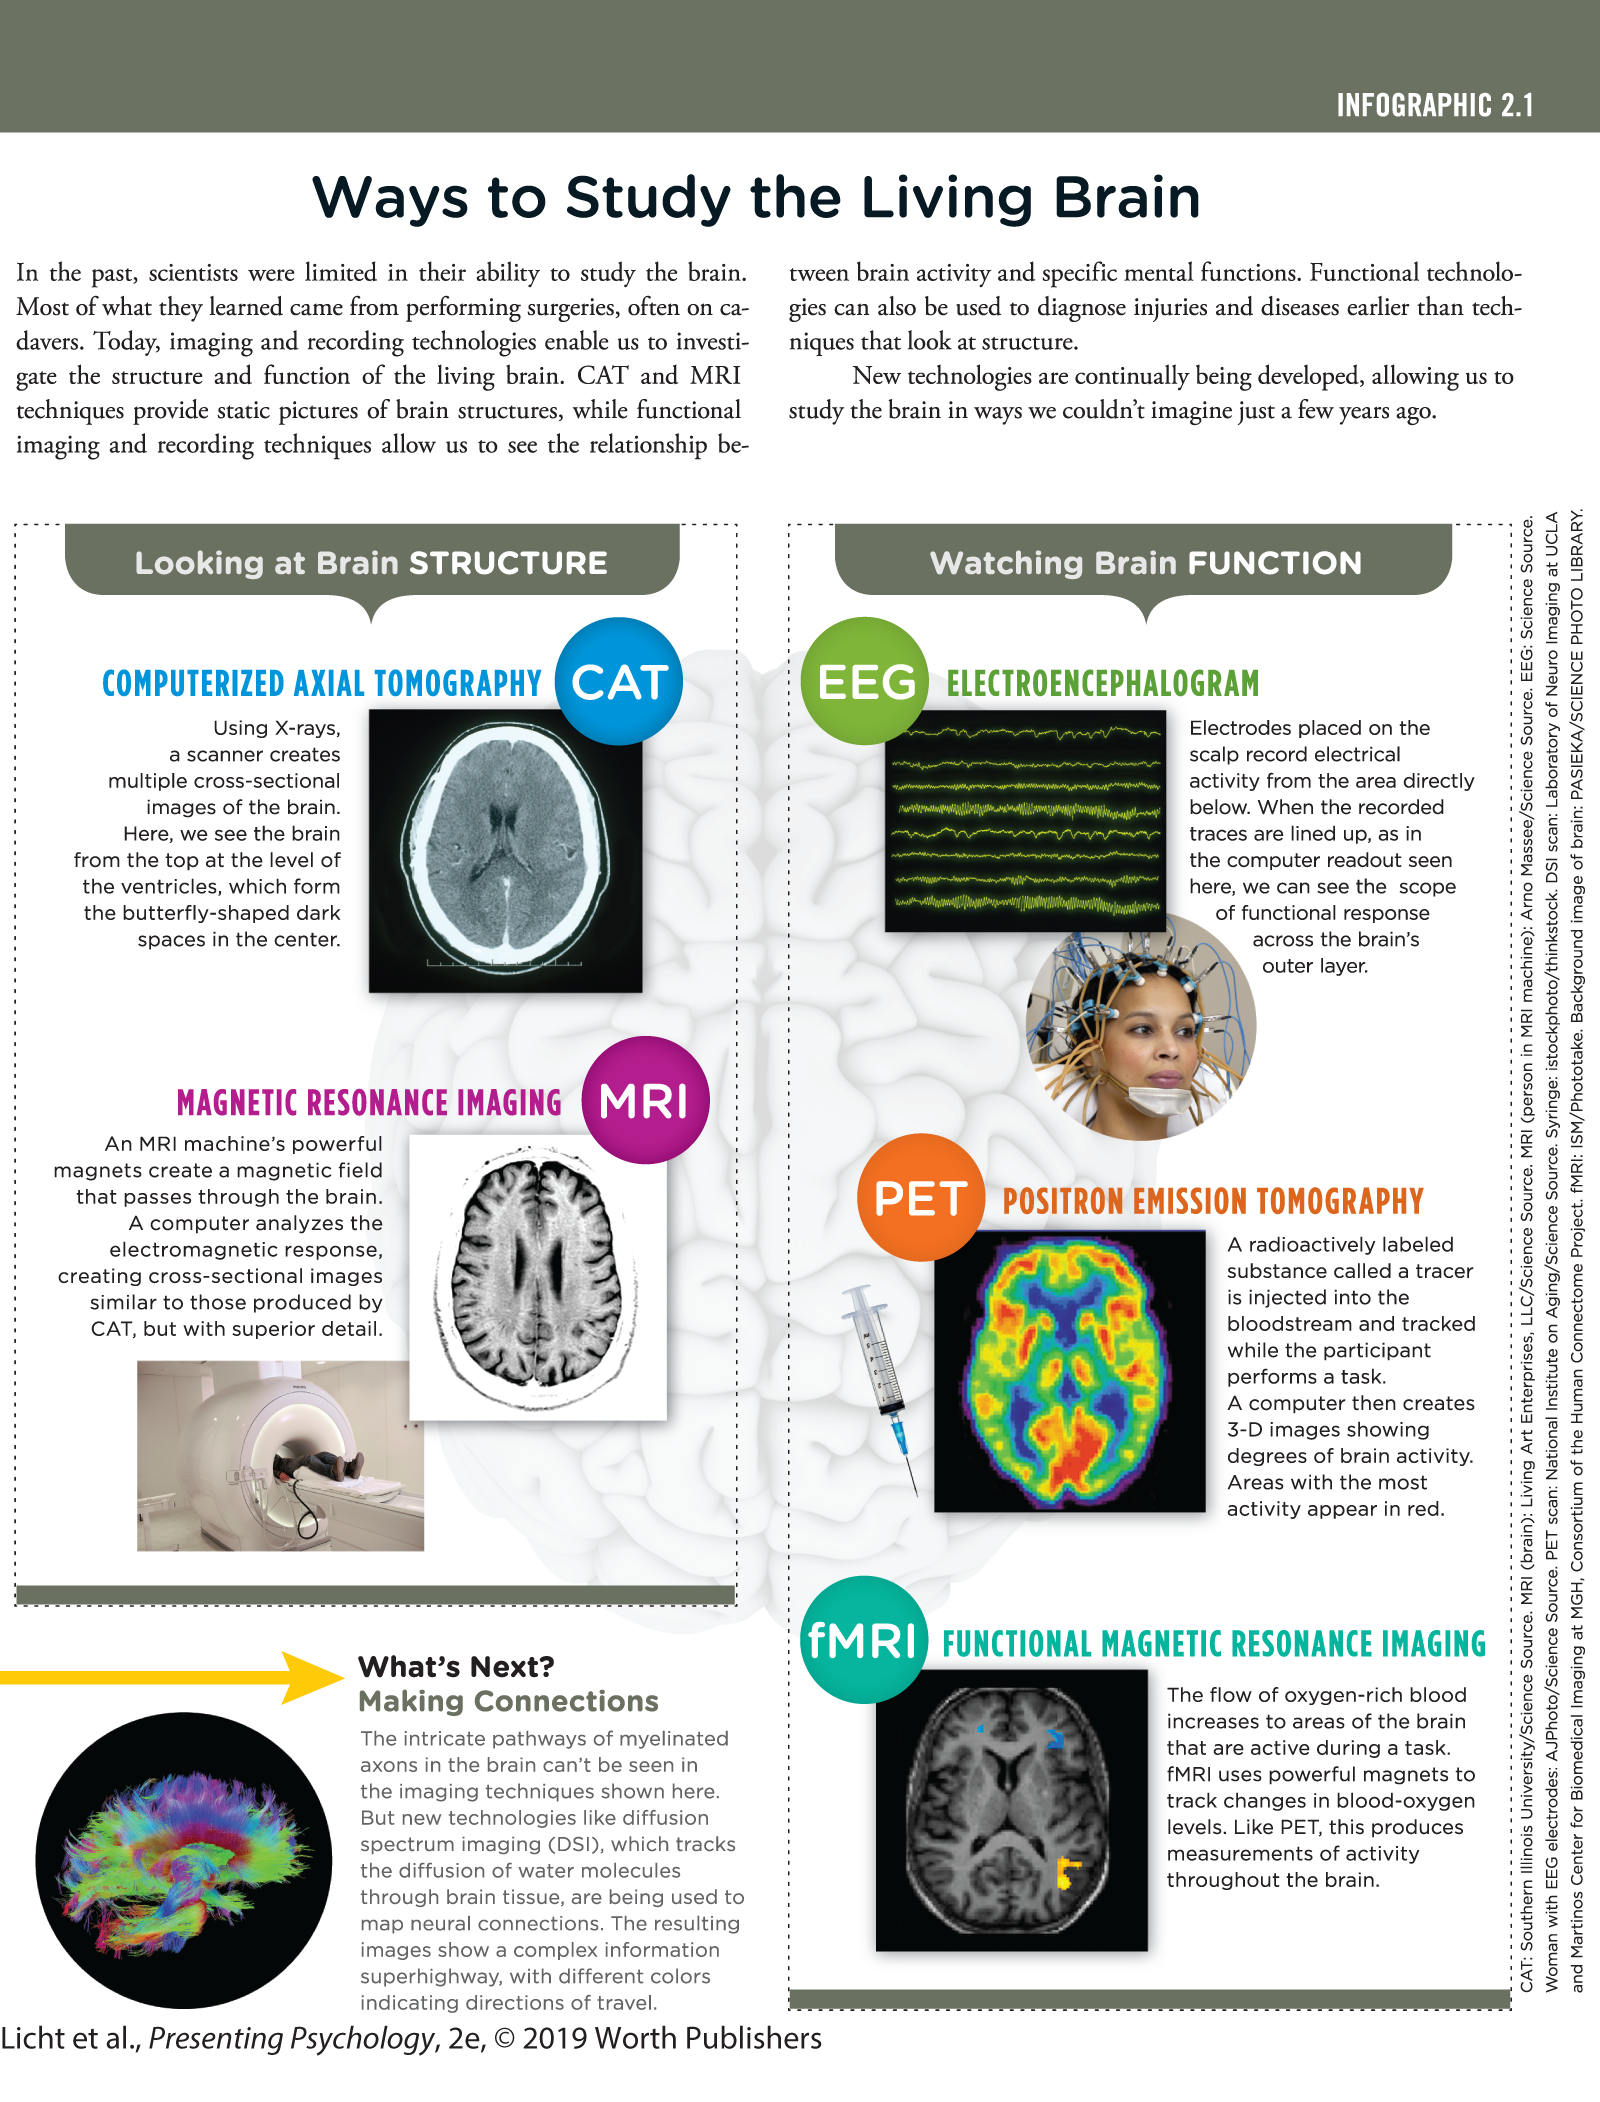 research methods to study the brain